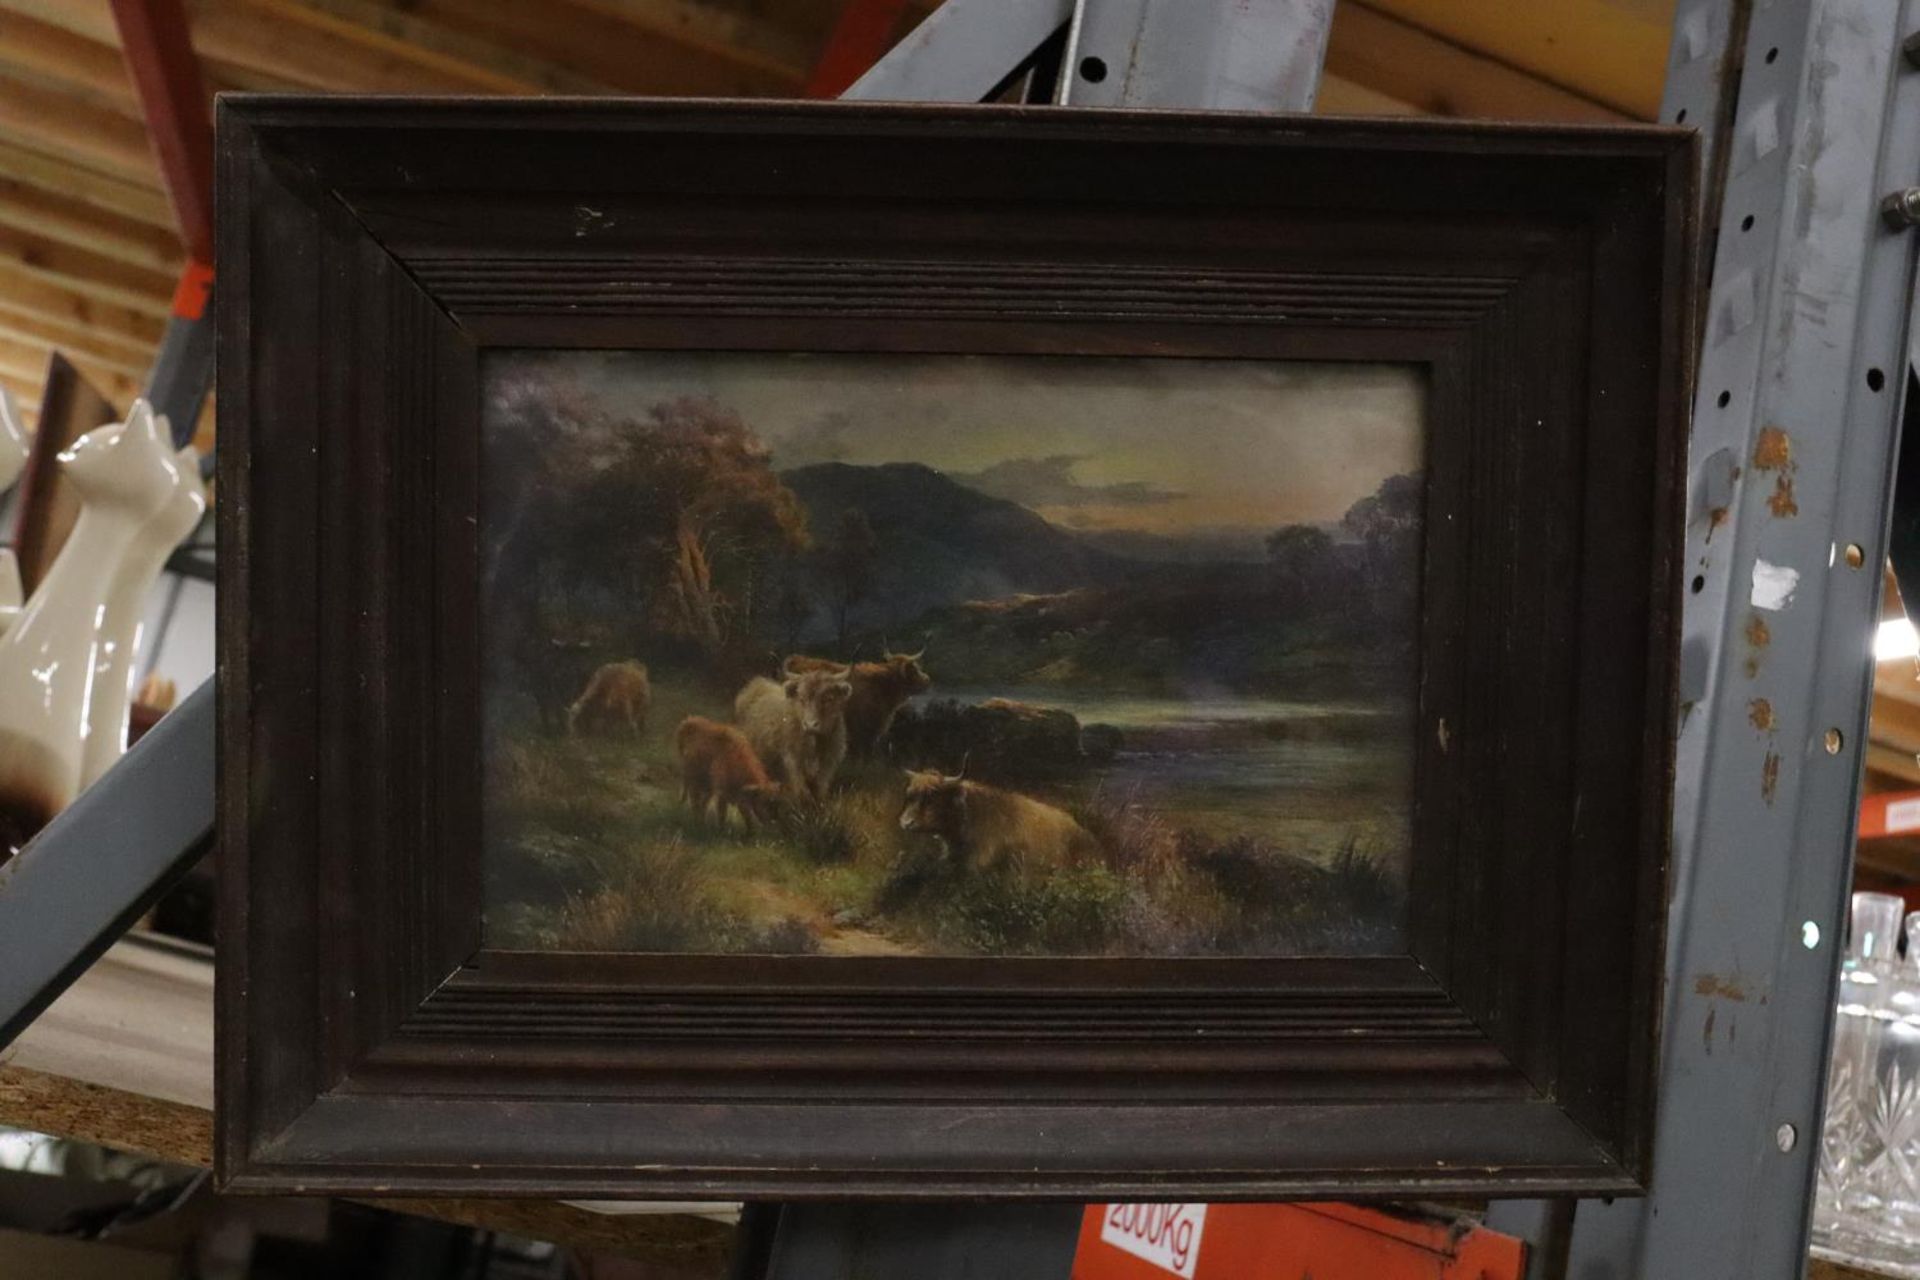 A FRAMED PRINT OF A COUNTRY CATTLE SCENE